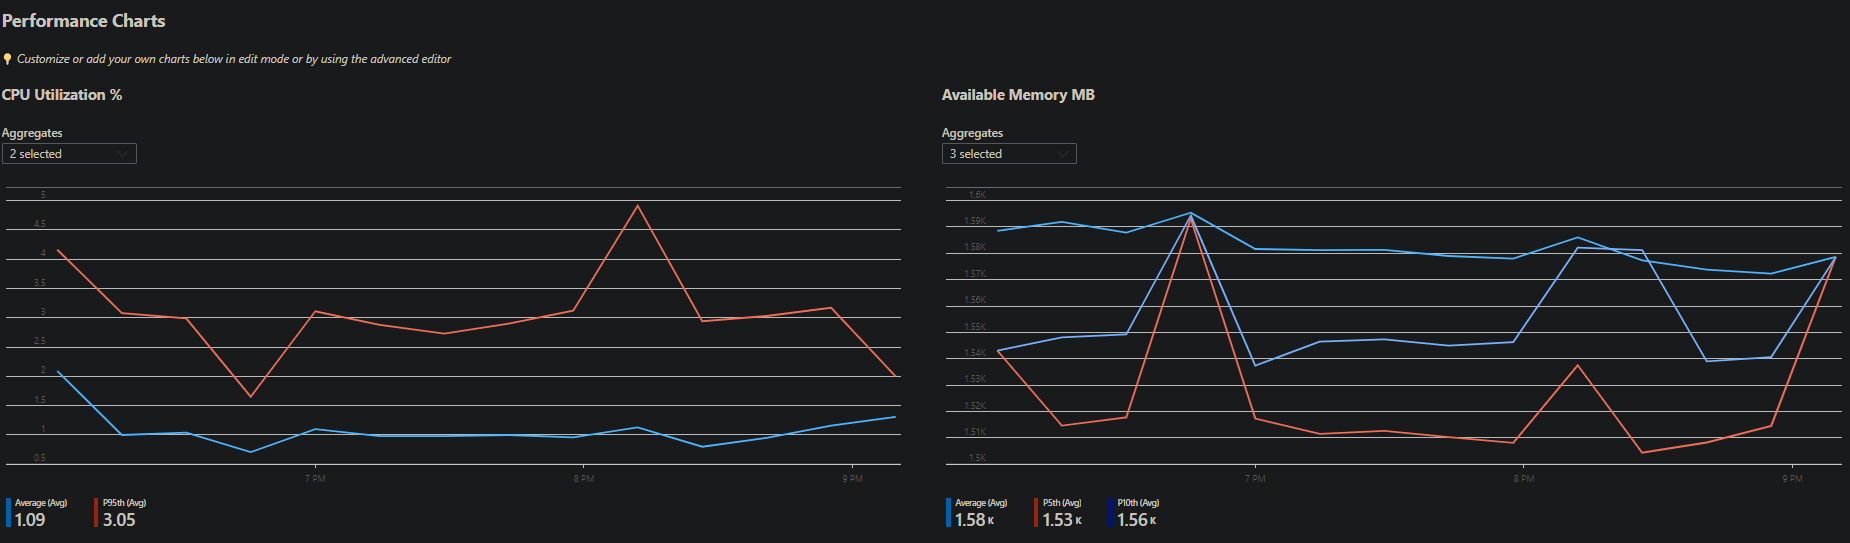 Azure Arc detailed CPU and Memory Performance Charts